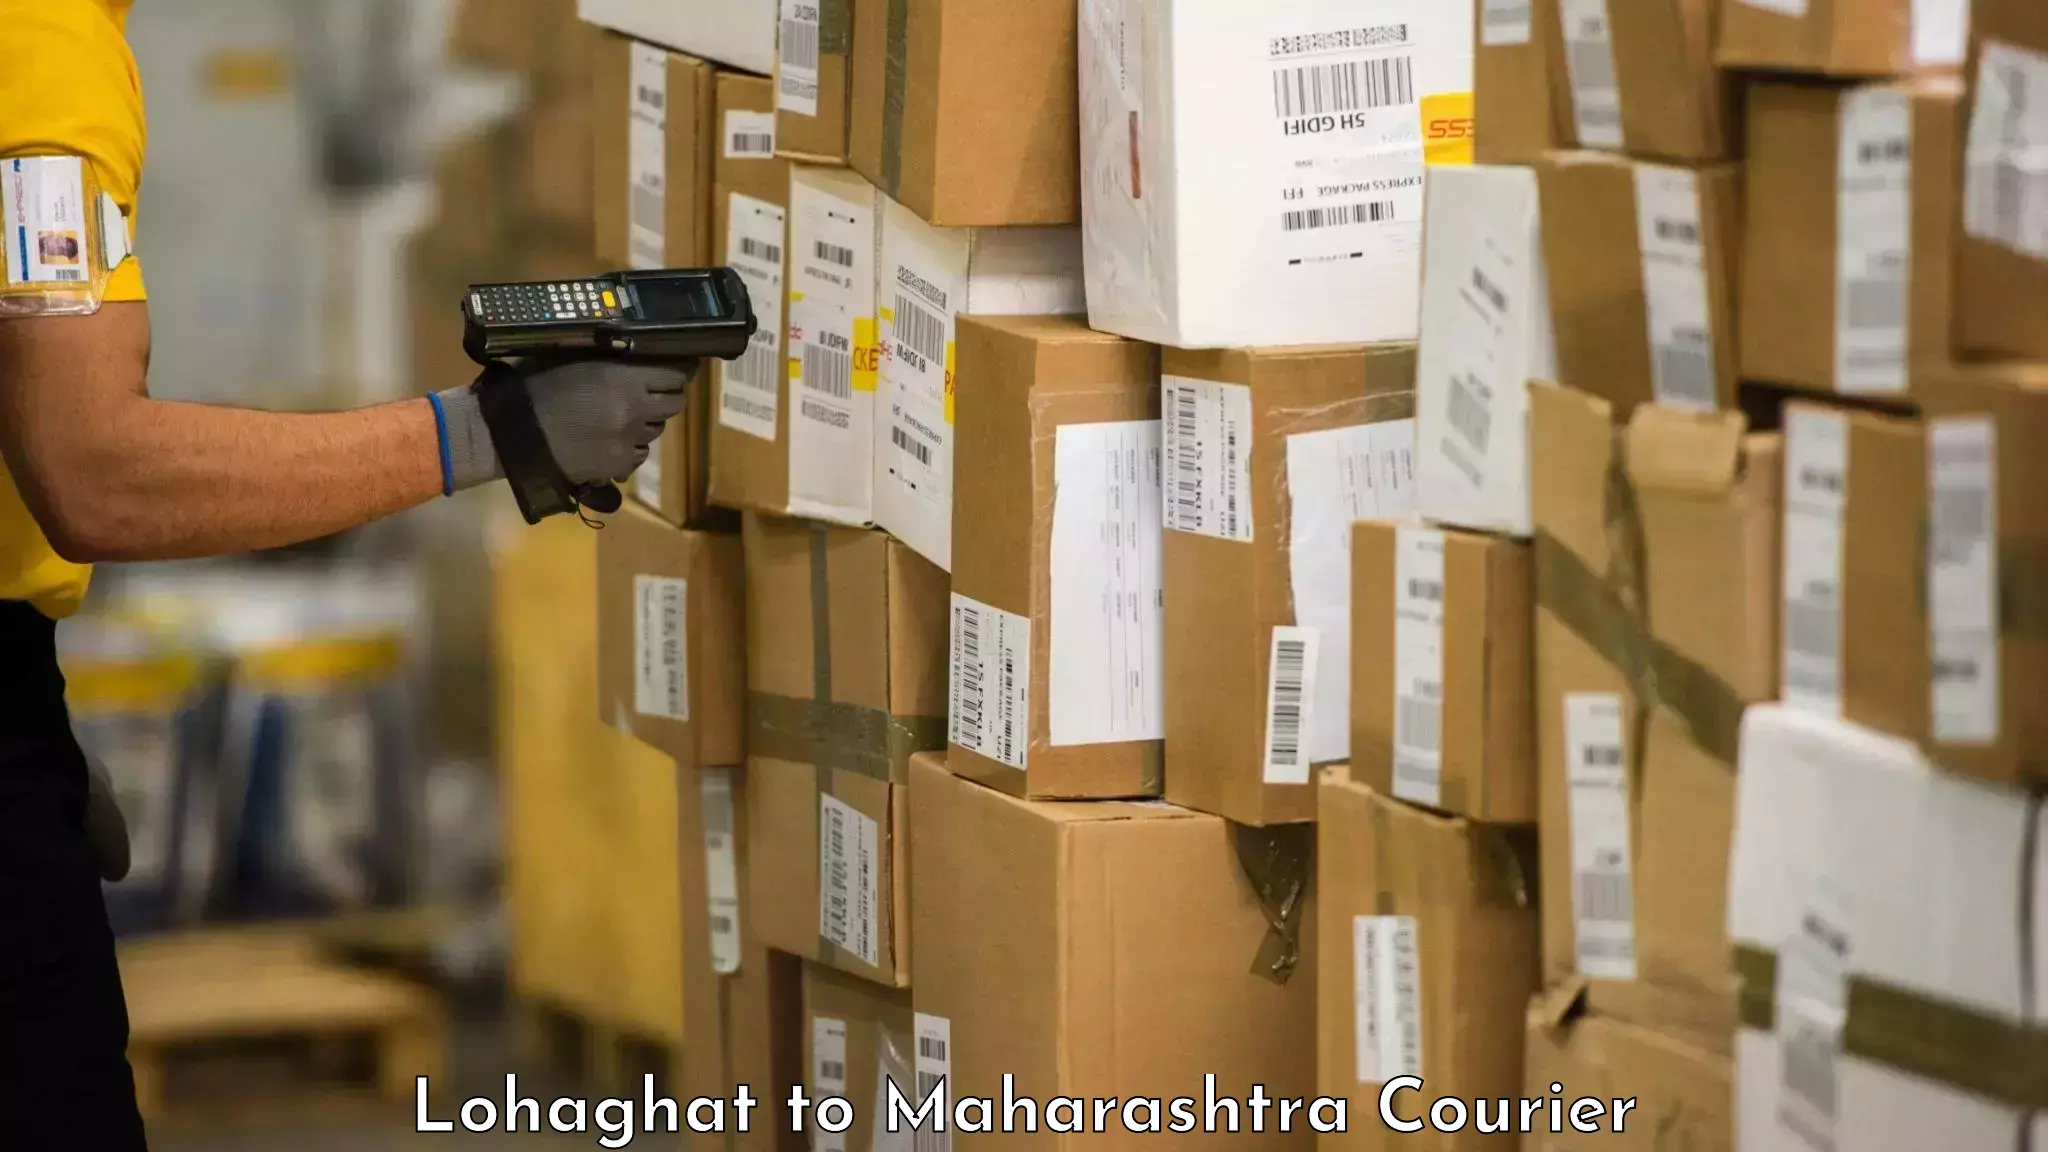 Personal effects shipping Lohaghat to Nashik